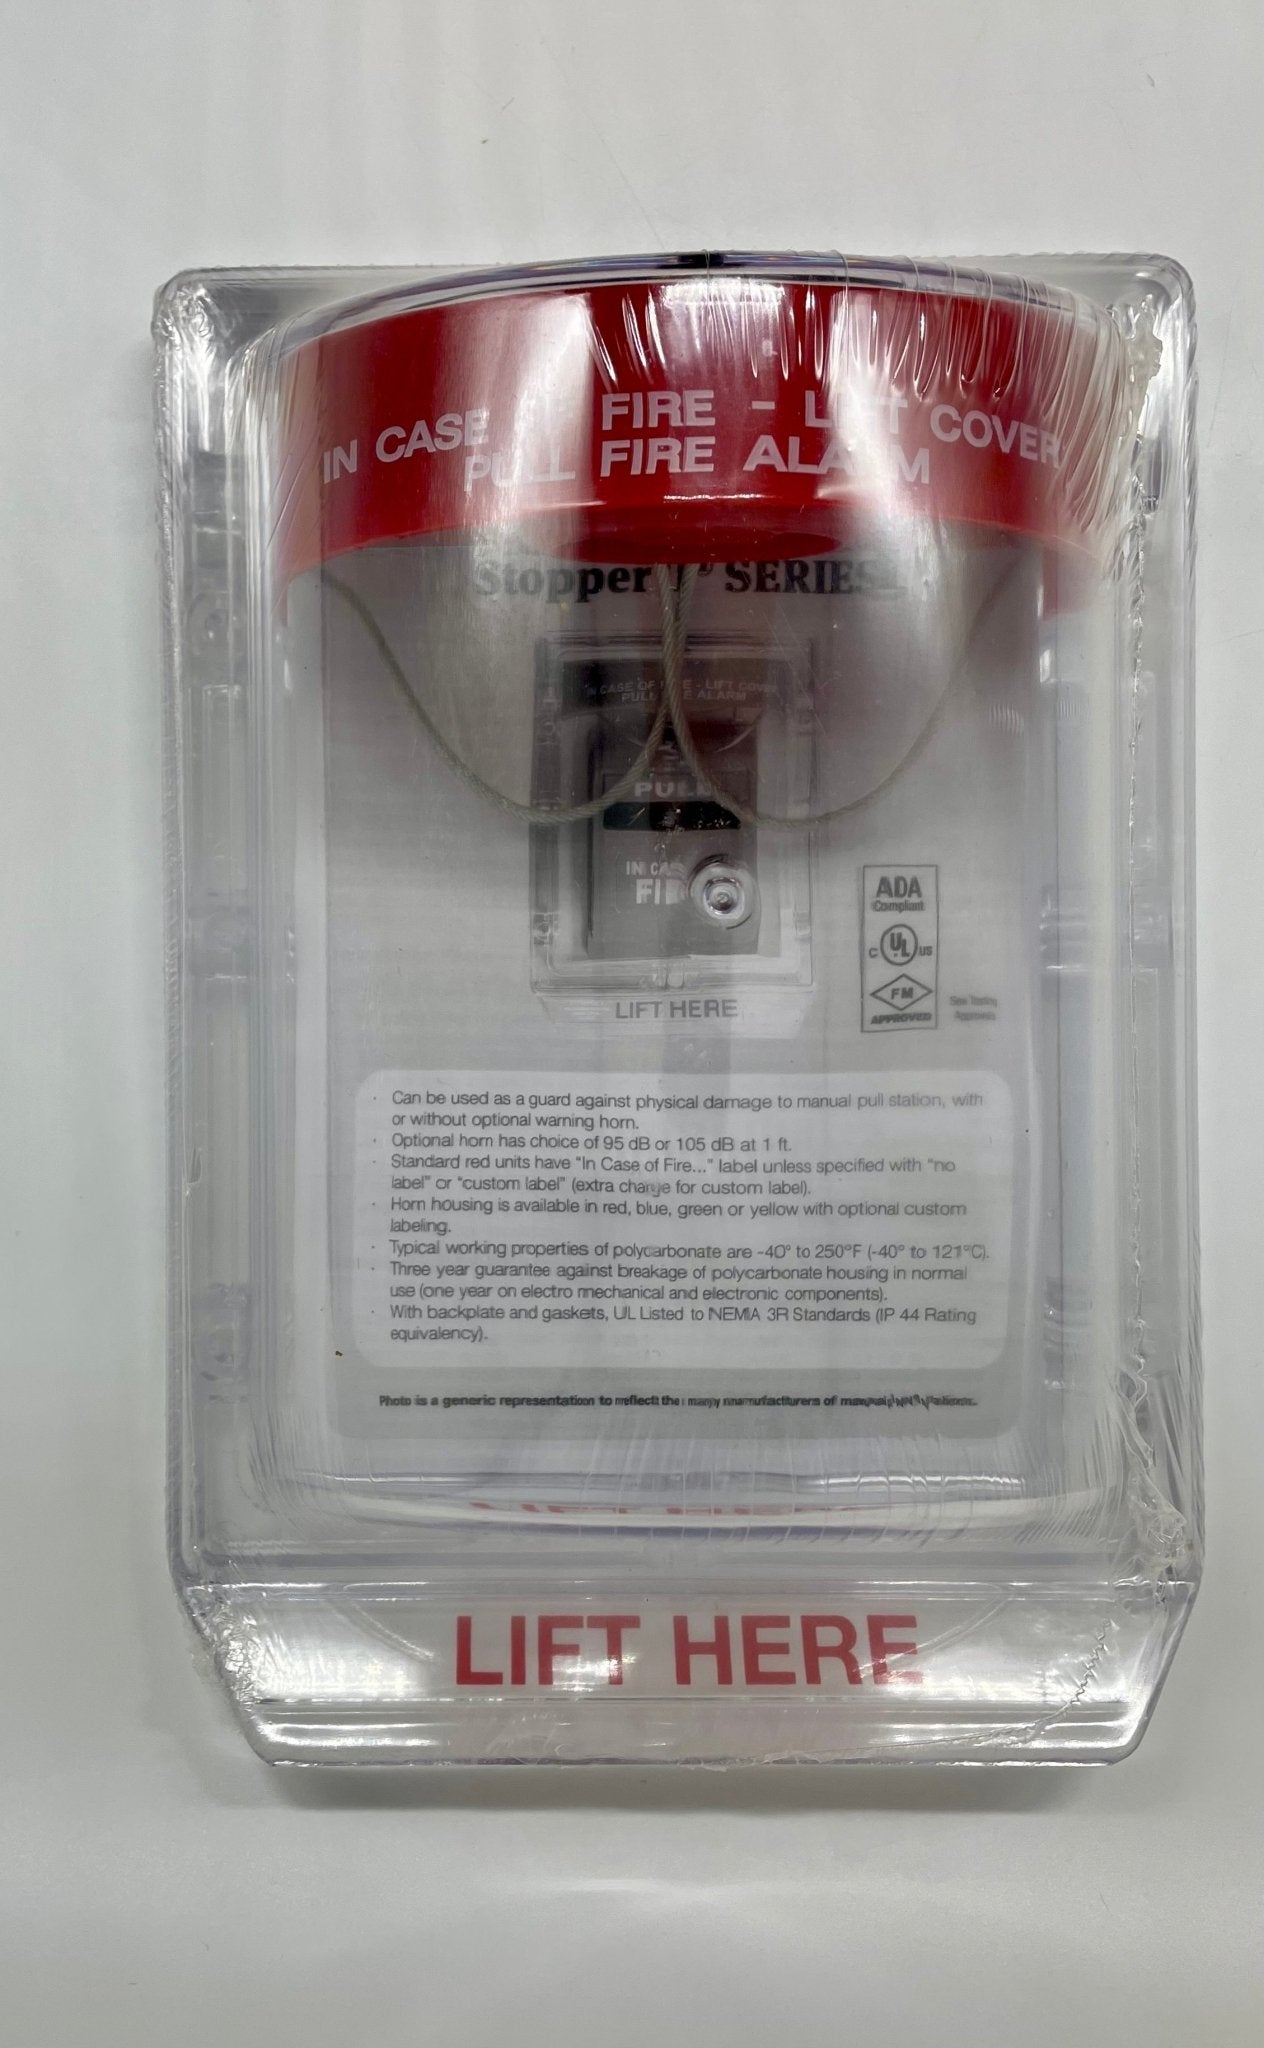 STI-1150, Stopper II with Horn Flush Mount, Indoor/Outdoor Rated, Fire Label - The Fire Alarm Supplier